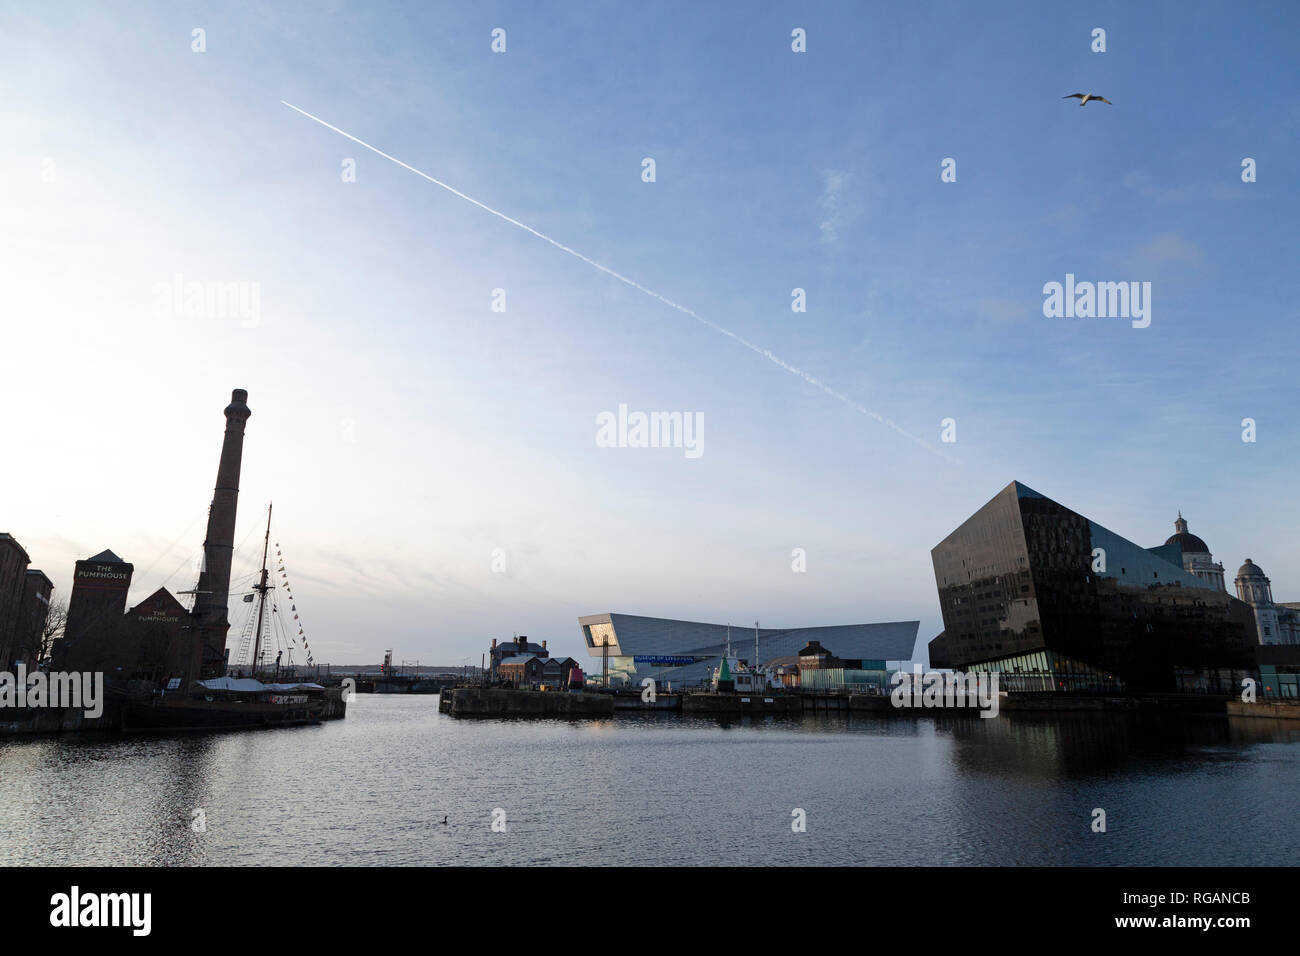 A vapour trail in the sky above the Museum of Liverpool and RIBA North in Liverpool, England. The buildings are seen across the water of the Canning D Stock Photo